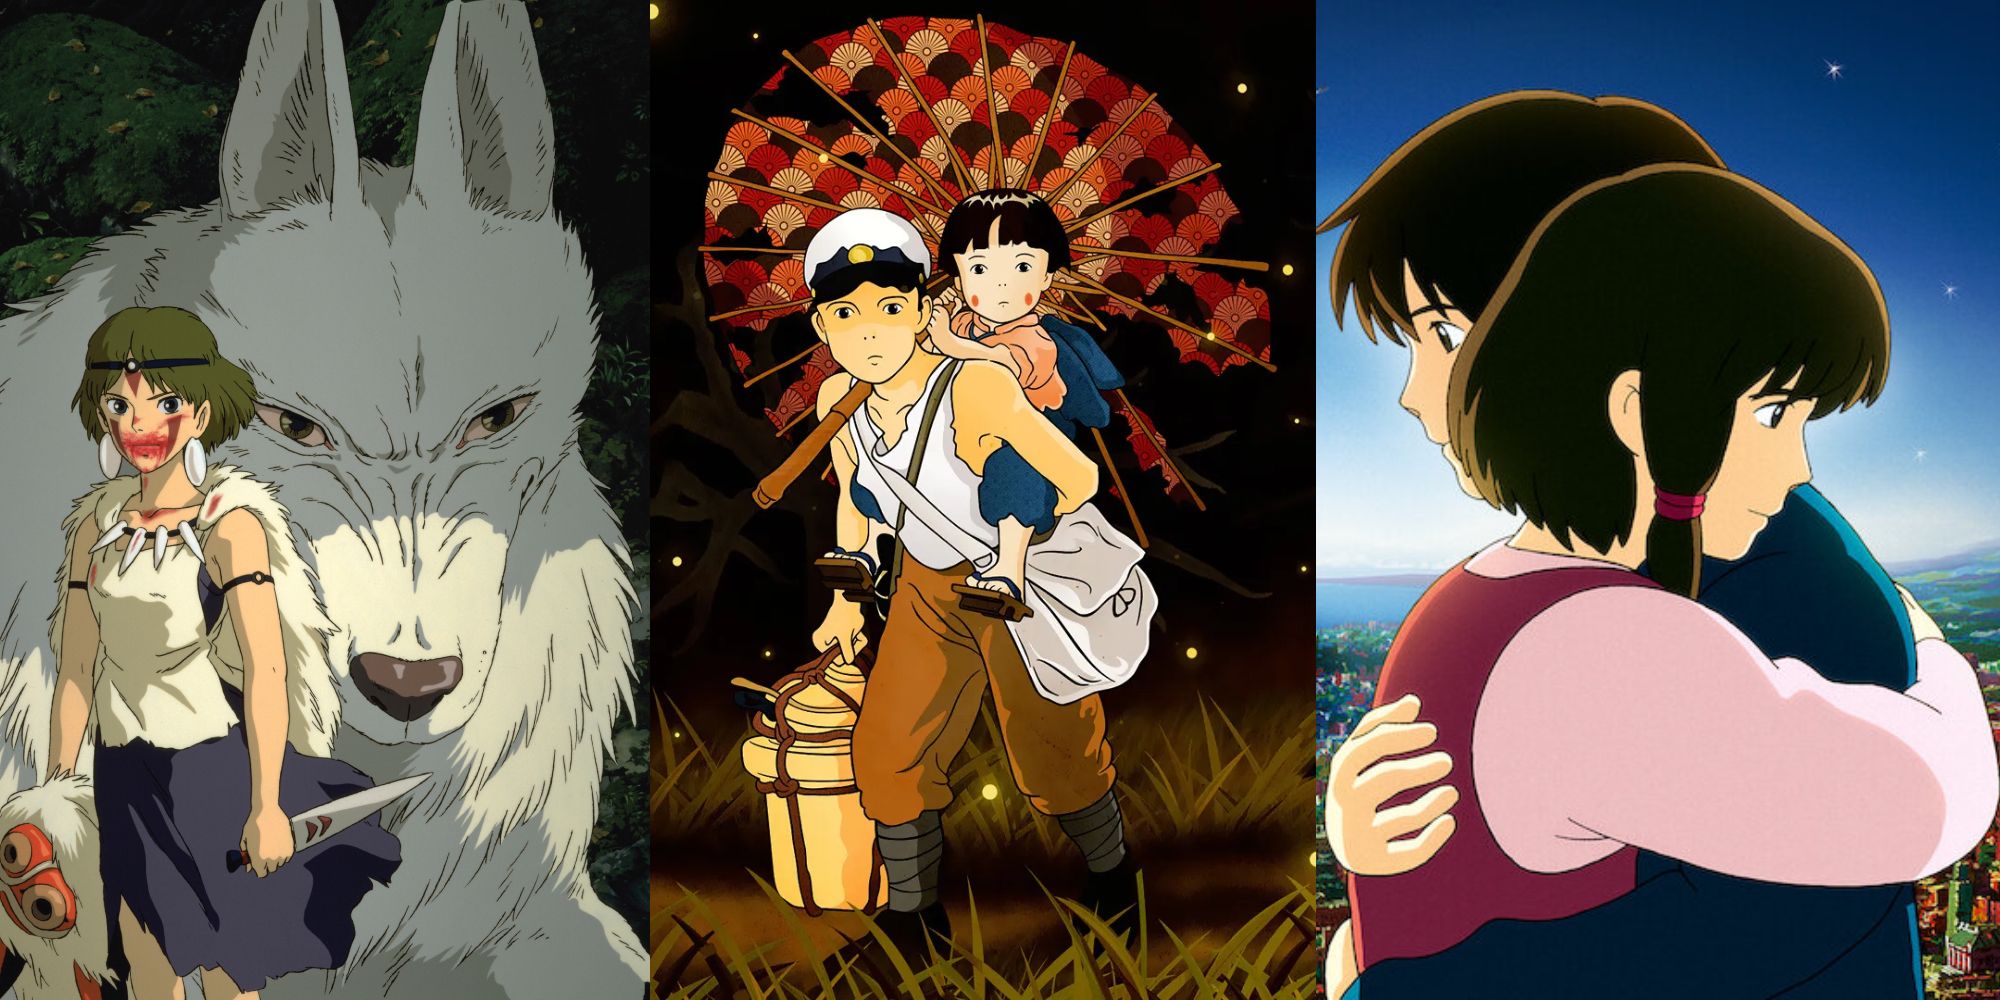 Every Studio Ghibli Movie Ranked by Rotten Tomatoes Score - The